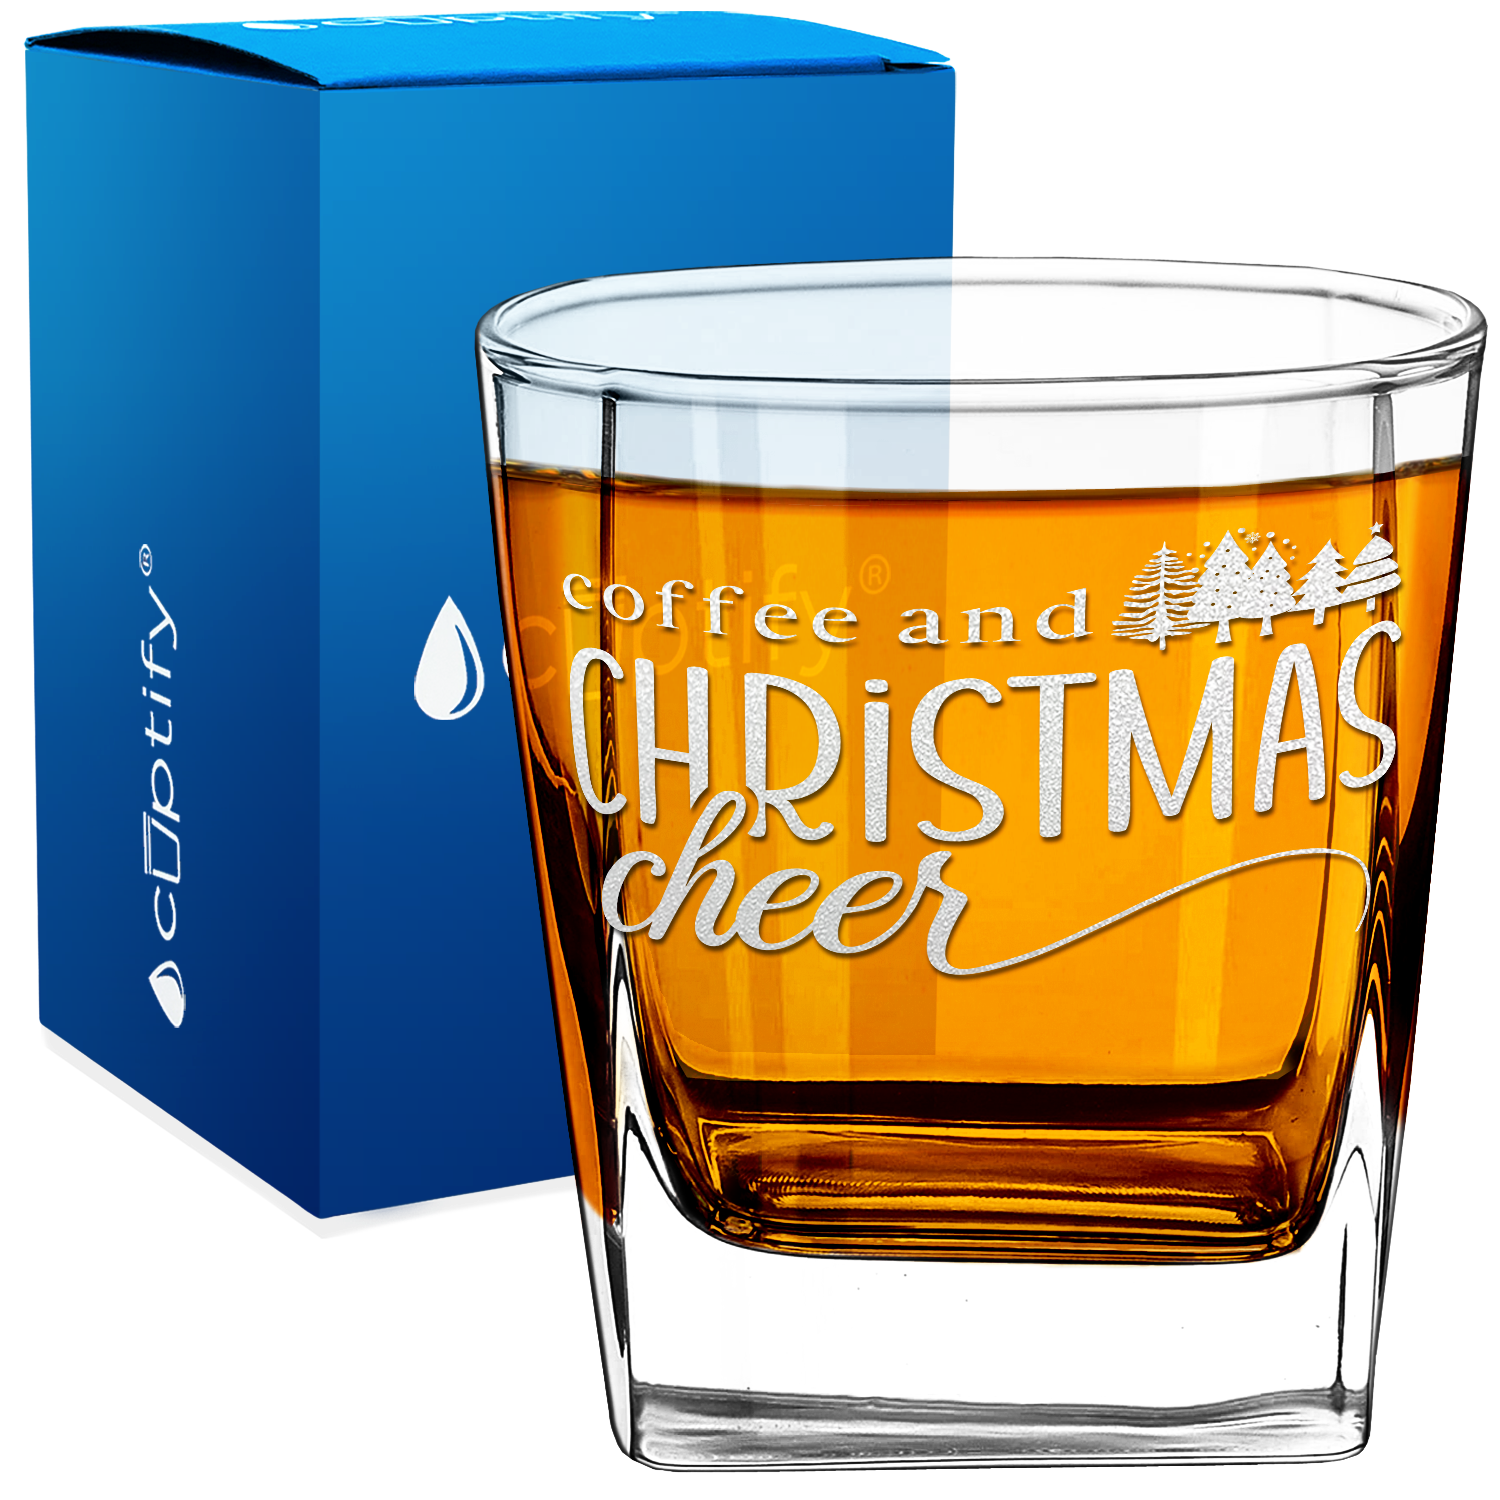 Coffee And Christmas Cheer 12oz Double Old Fashioned Glass